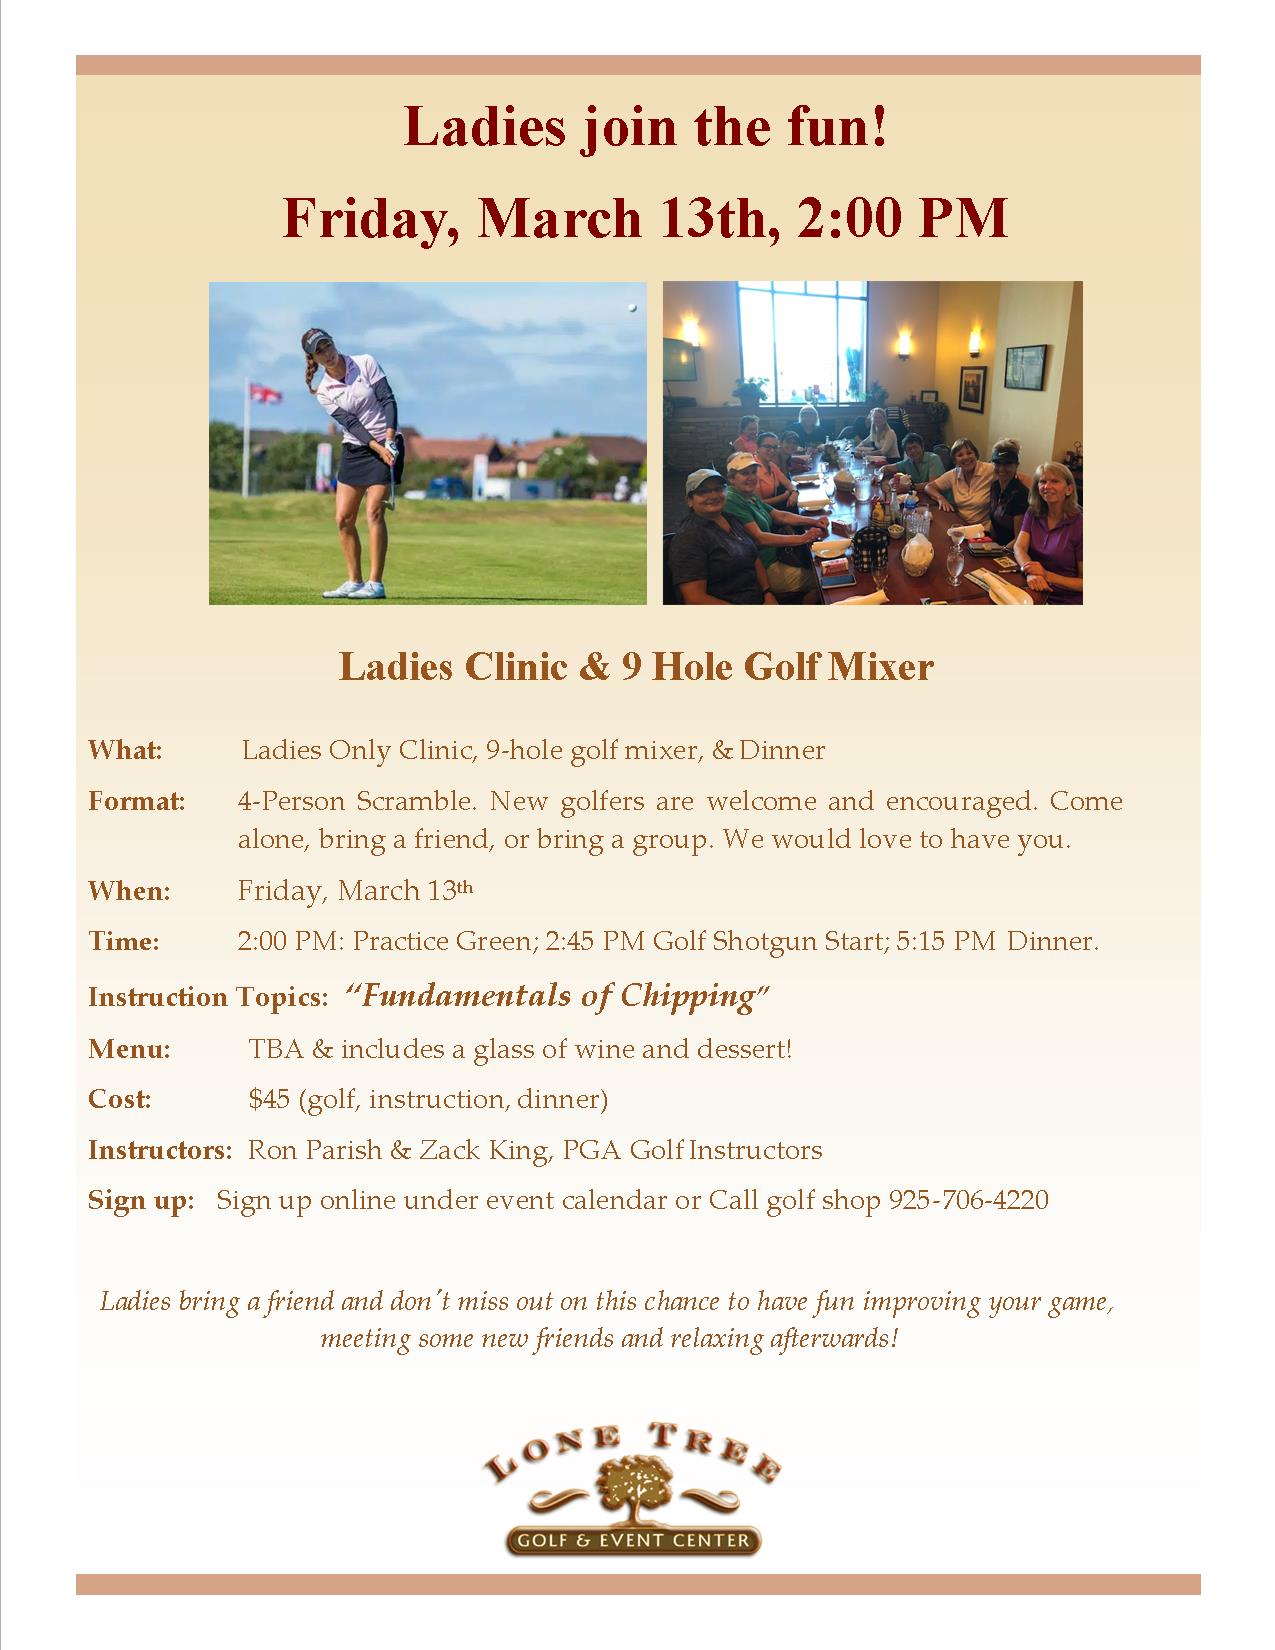 Ladies Clinic 9 holes and Dinner March 13 2020 pub